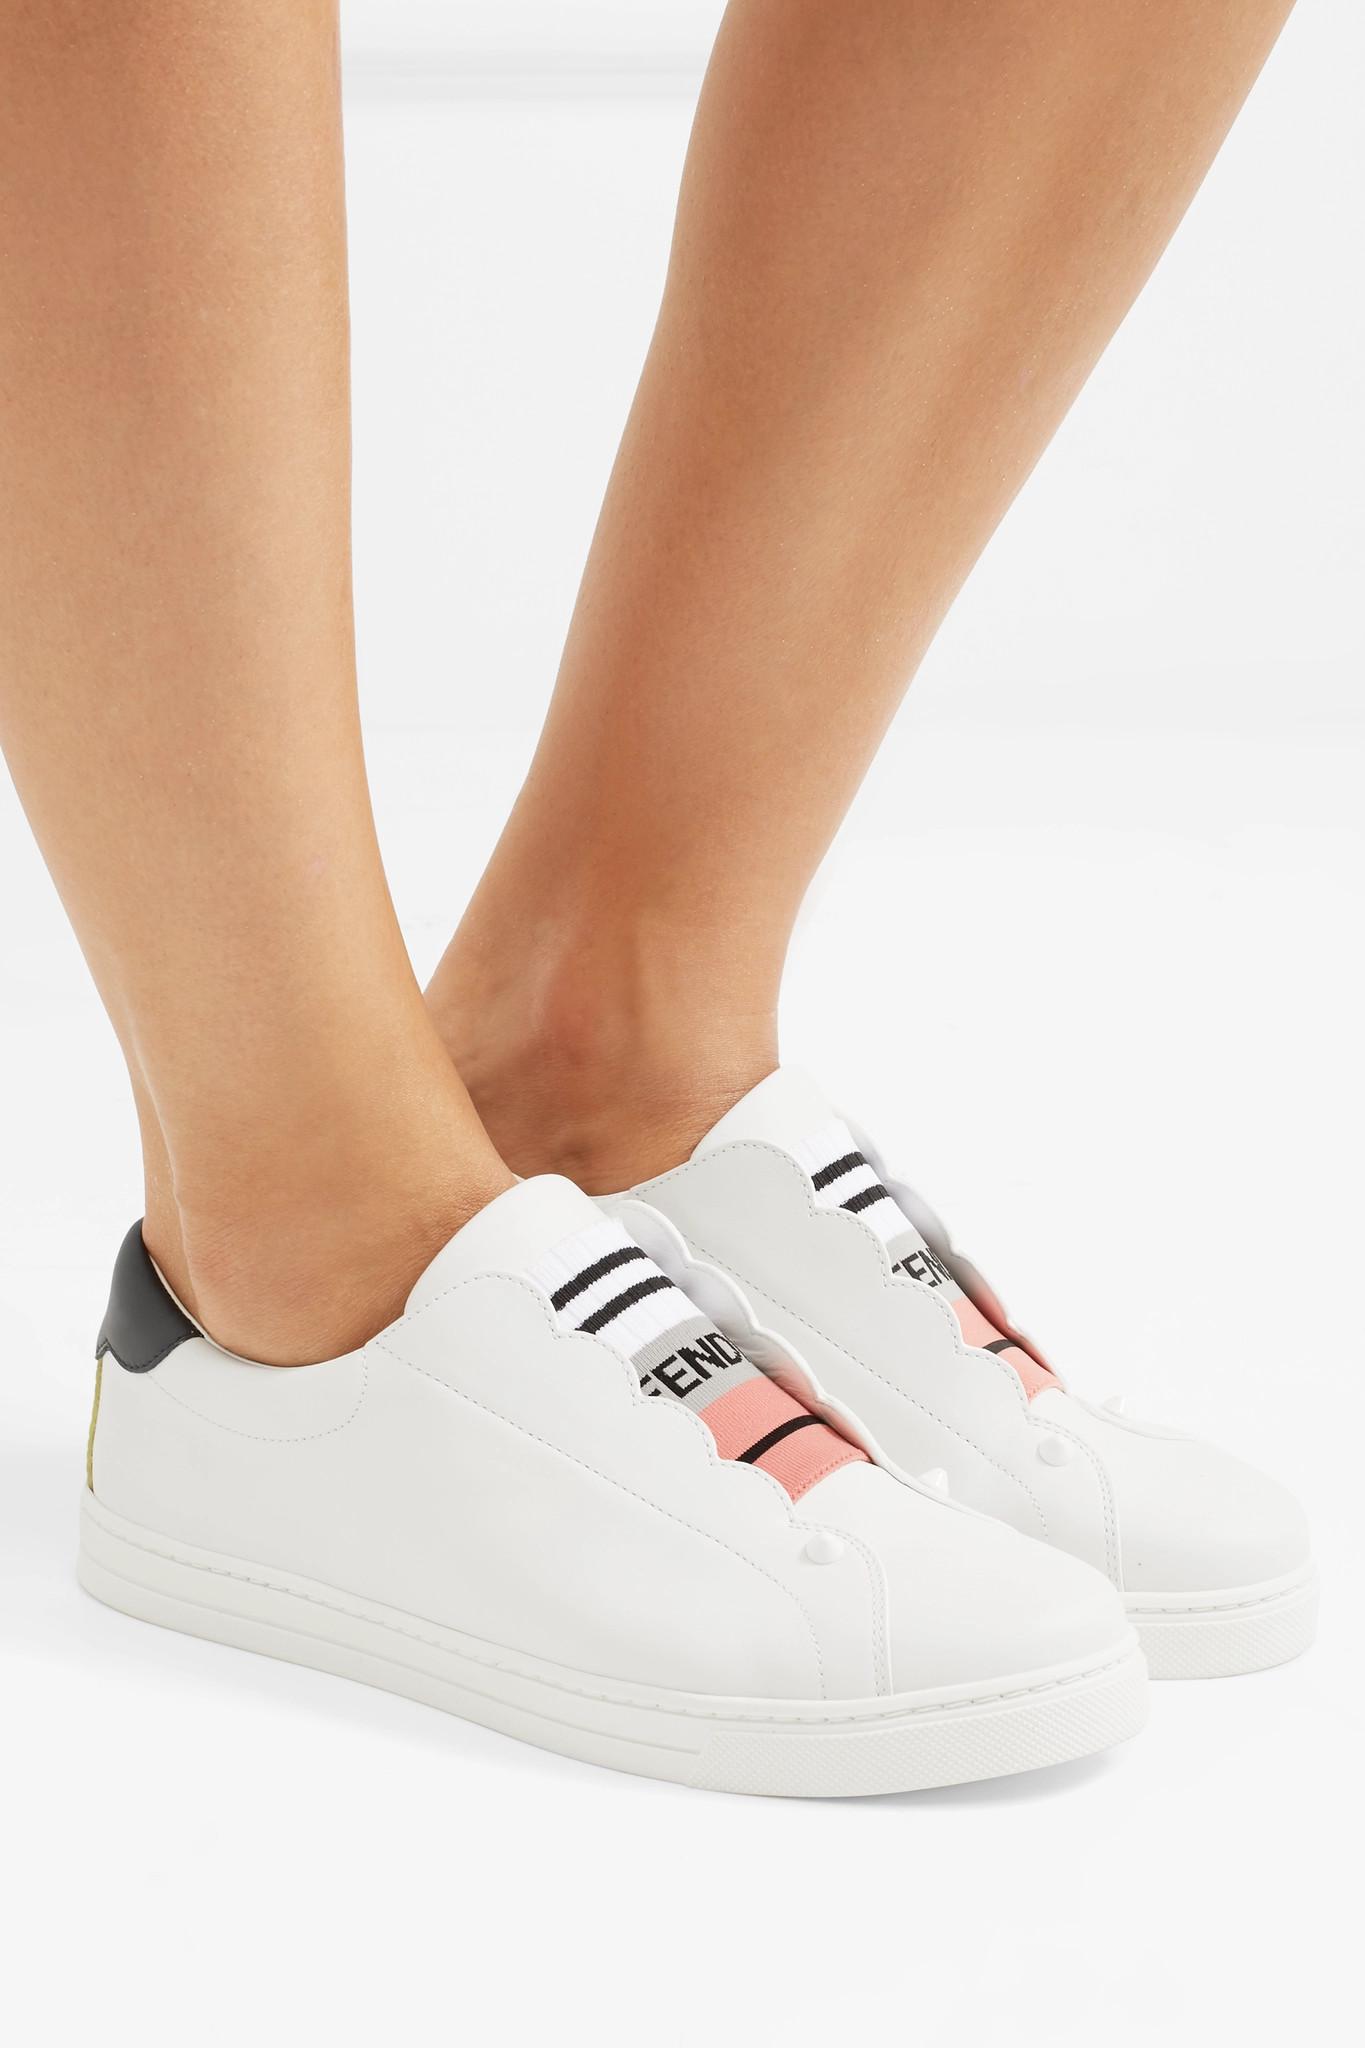 Fendi Scalloped Leather Slip-on Sneakers in White | Lyst